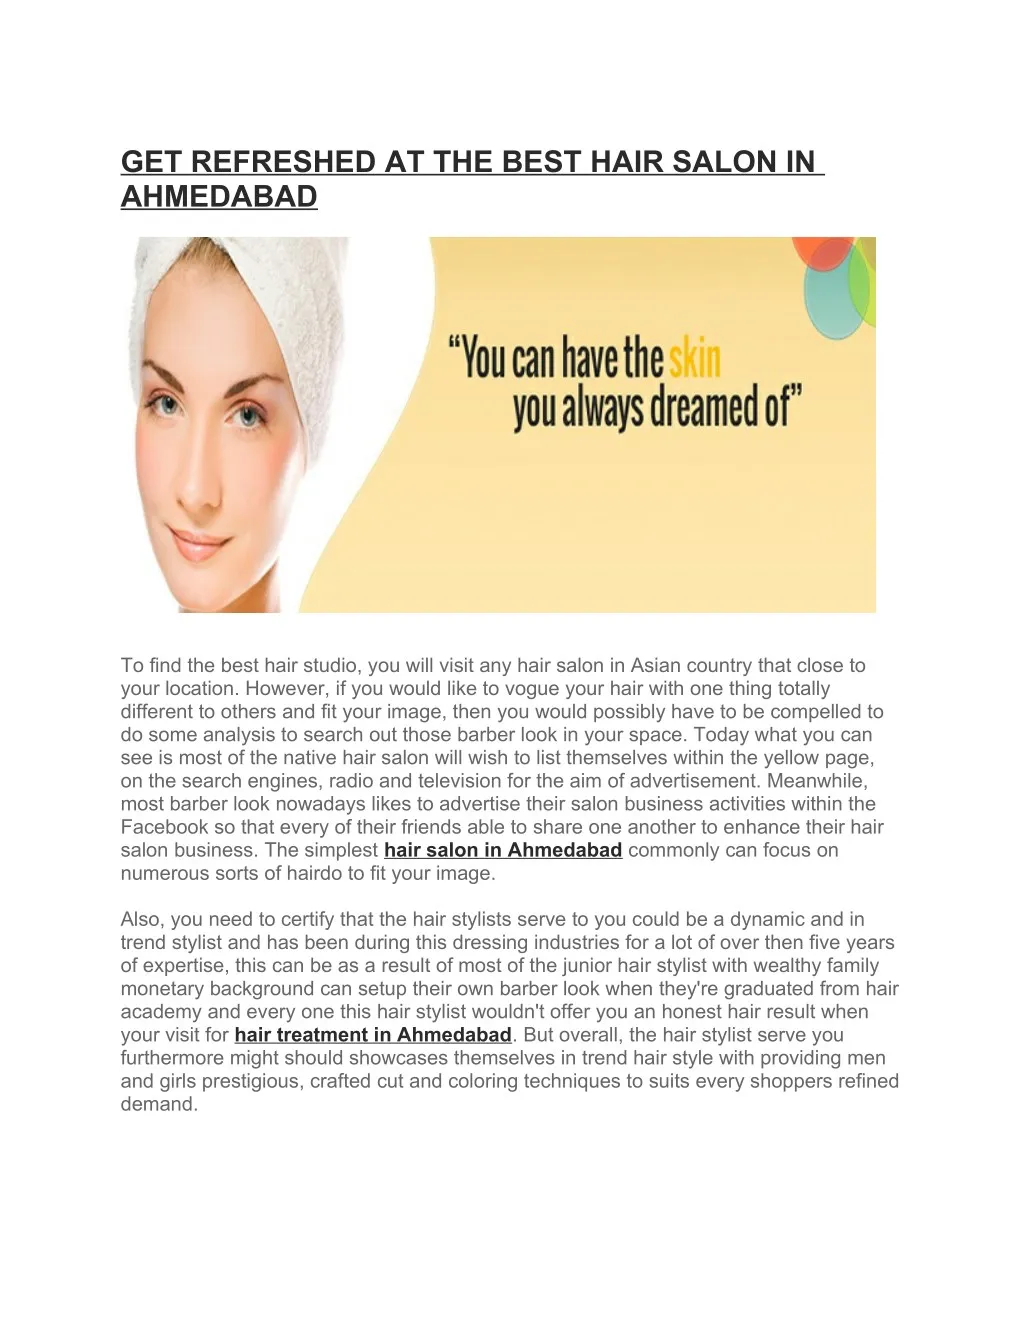 get refreshed at the best hair salon in ahmedabad